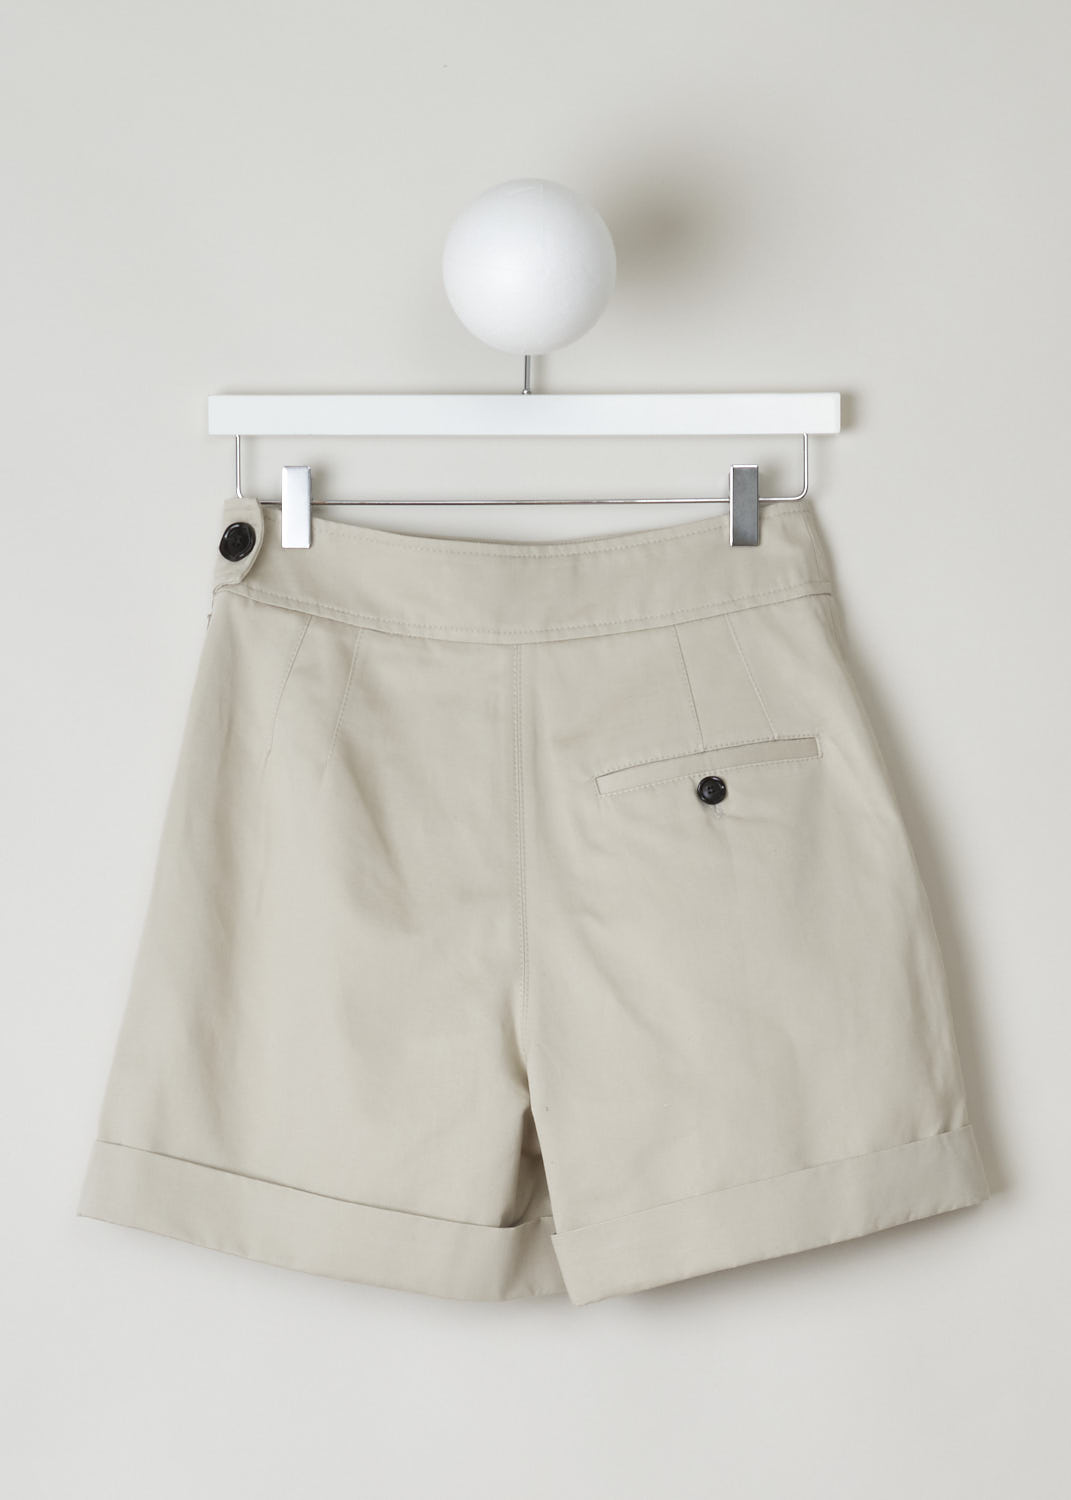 MARNI, BEIGE HIGH WAISTED SAFARI SHORTS, PAMA0151A0_TCZ35_00W20, Beige, Back, These fun high waisted safari shorts have a broad waistband. The closure option on the model is a concealed zipper on the side, as well as a single black button. On either side, a slanted pocket can be found. A single welt pocket with button can be found in the back. These shorts have a folded over hem.
